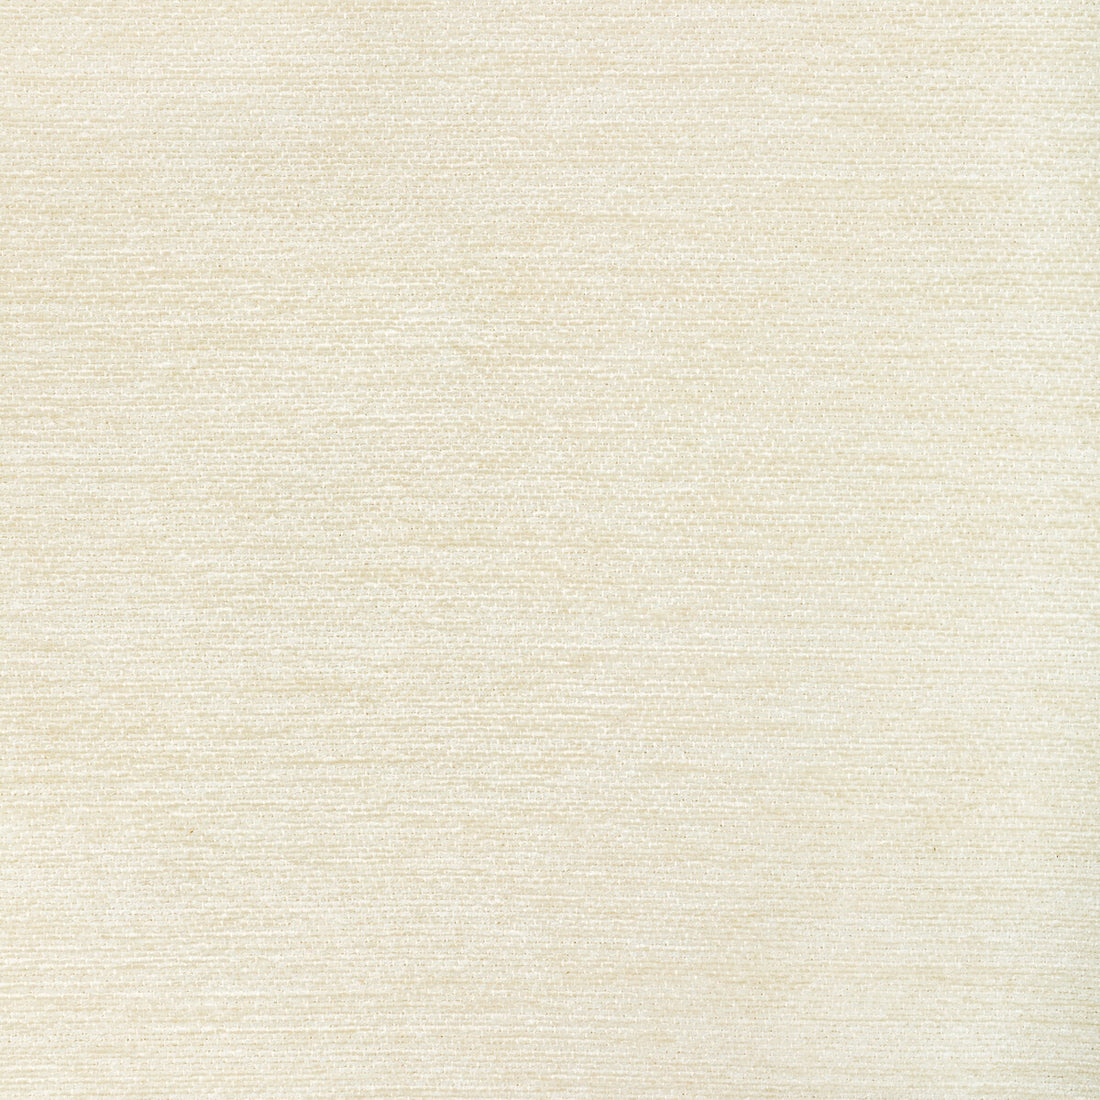 Cognin Texture fabric in ivory color - pattern 8022126.1.0 - by Brunschwig &amp; Fils in the Chambery Textures III collection